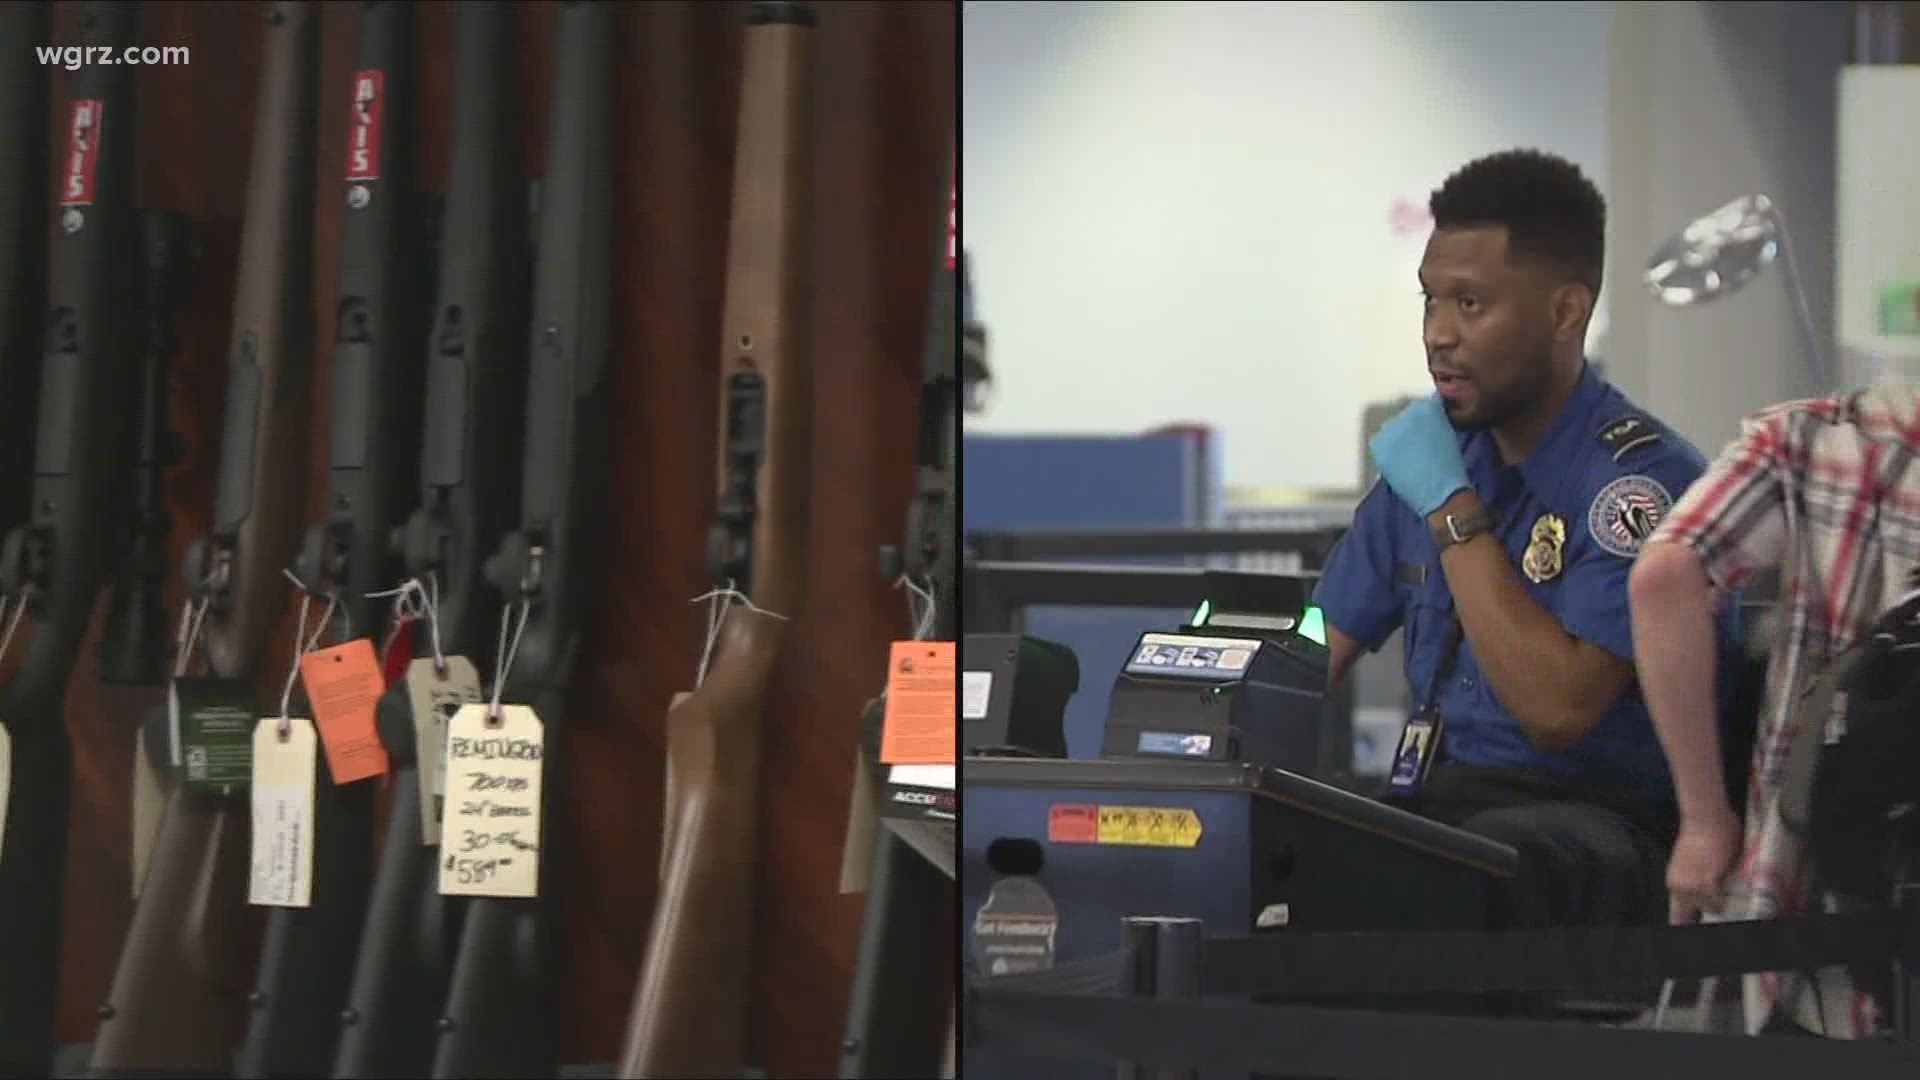 The TSA says it found firearms at airport checkpoints at a rate three times higher this July than last July.